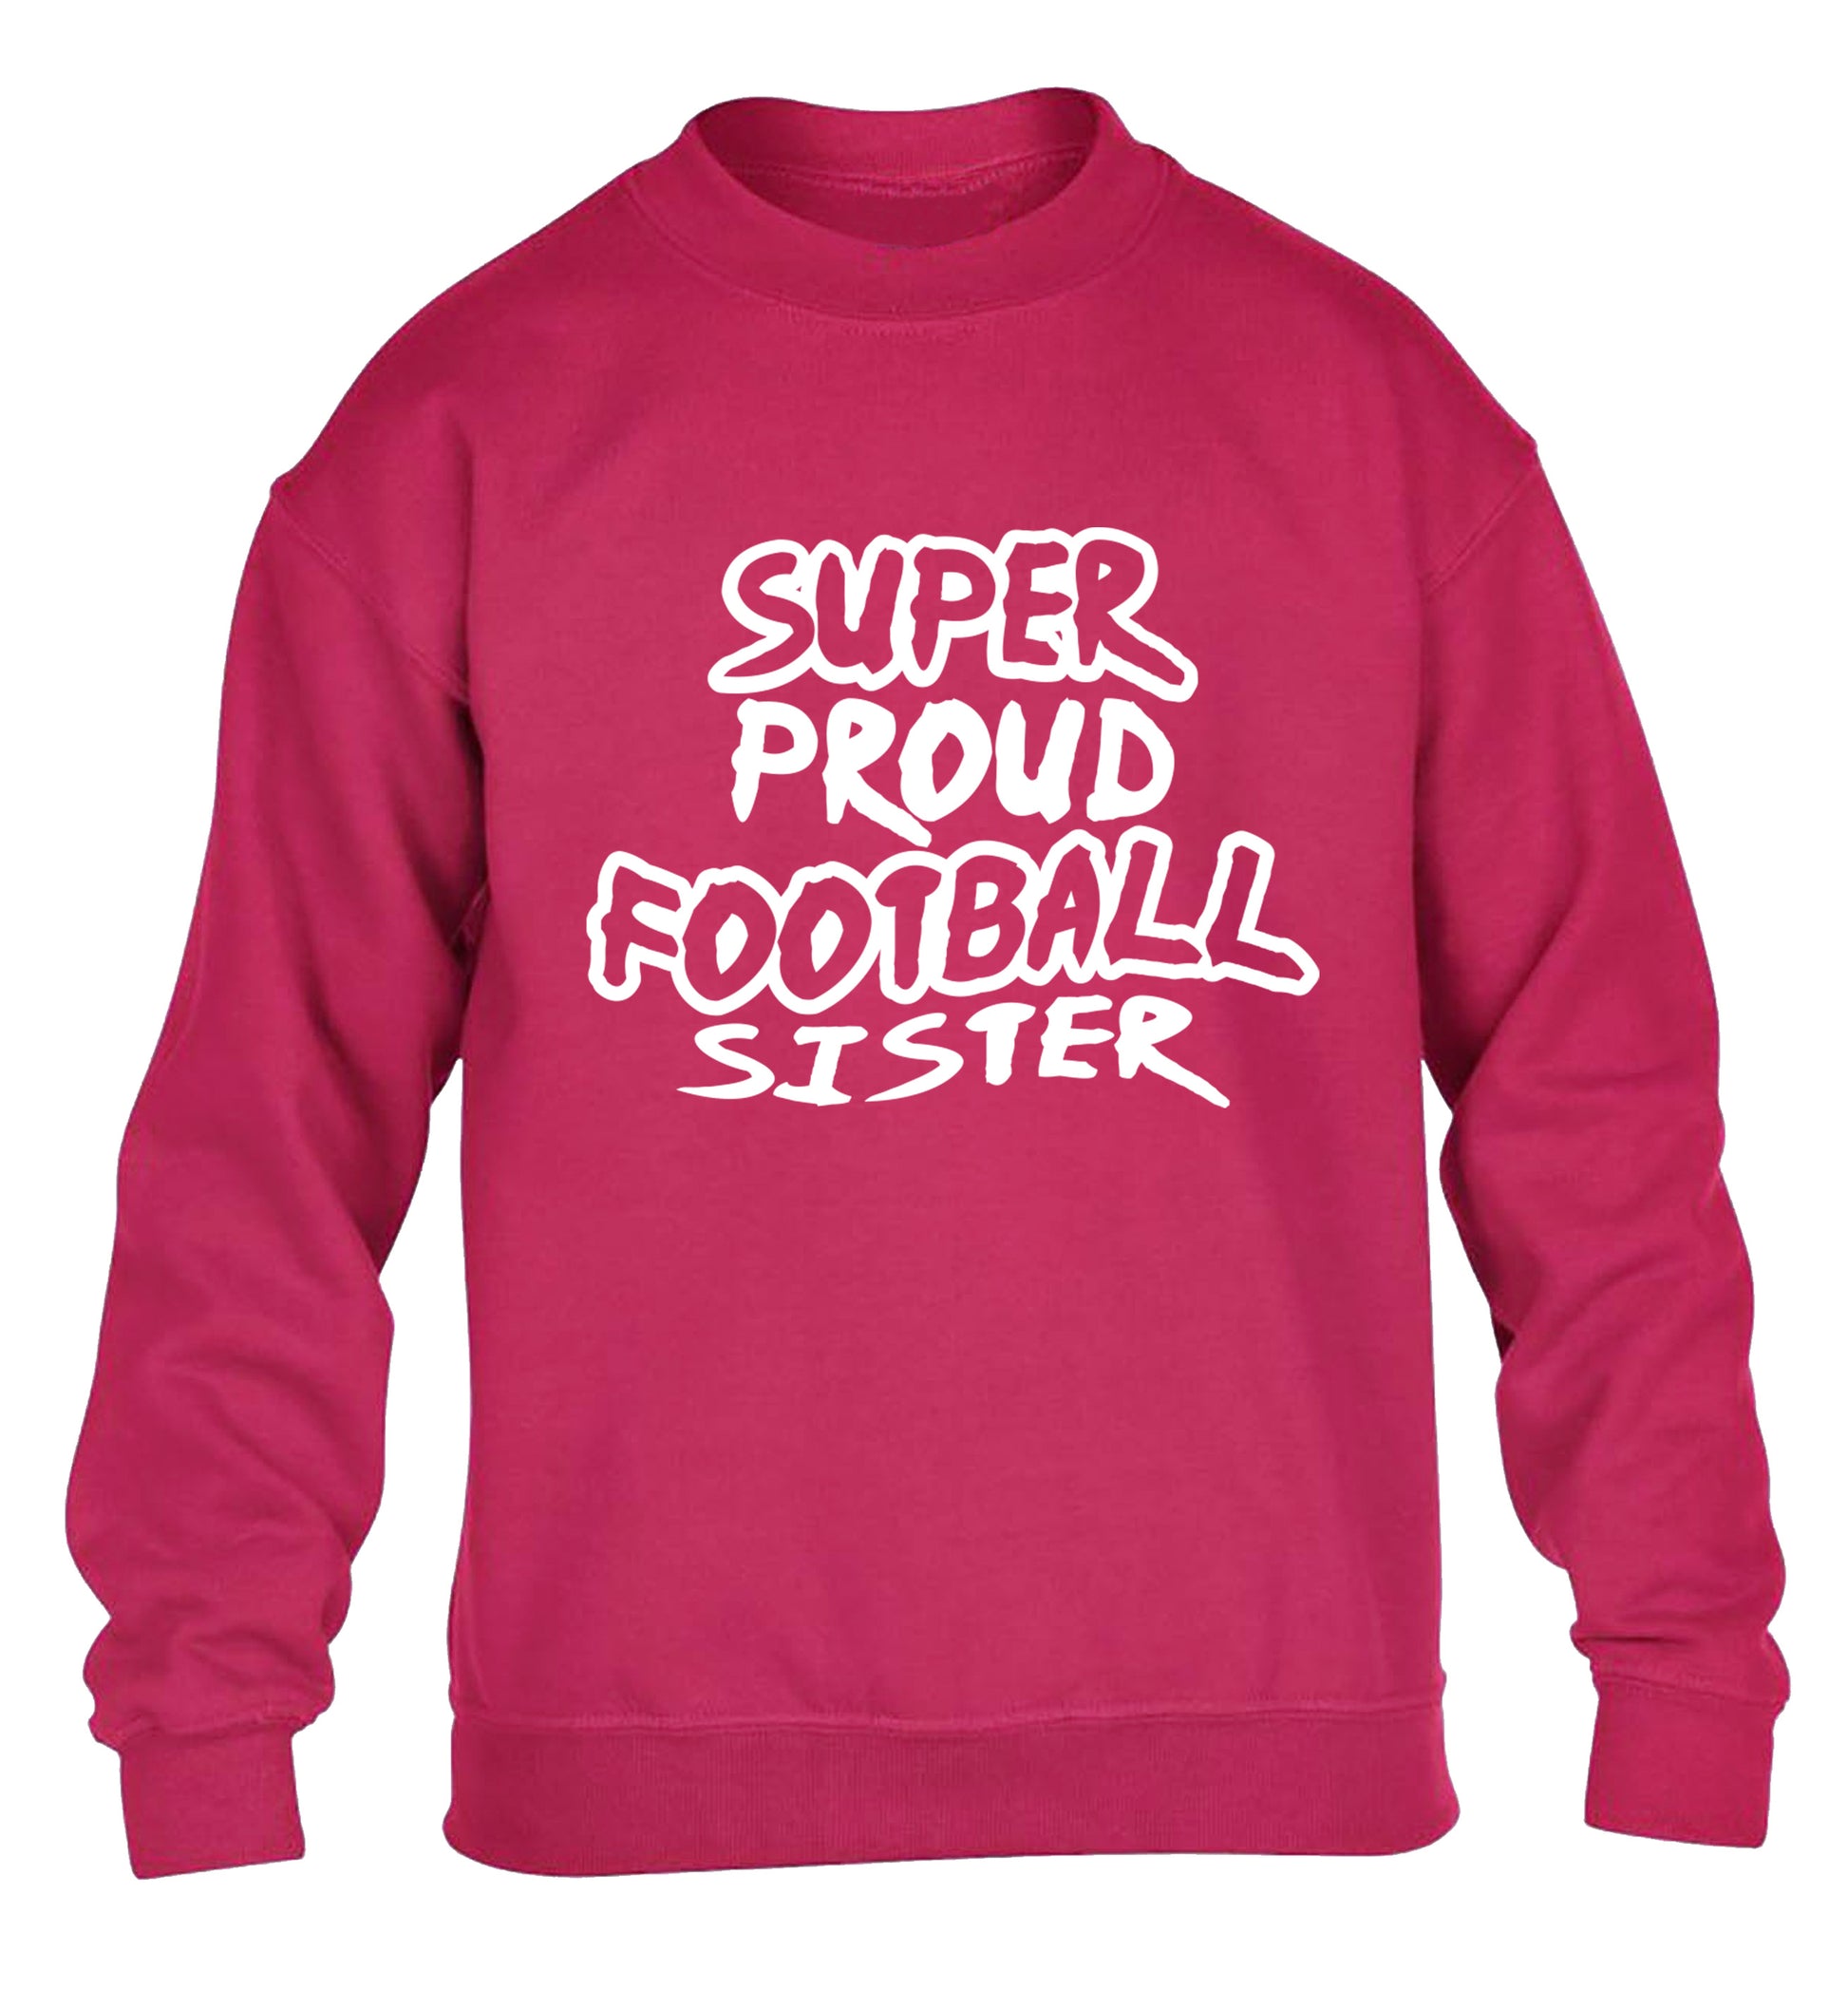 Super proud football sister children's pink sweater 12-14 Years